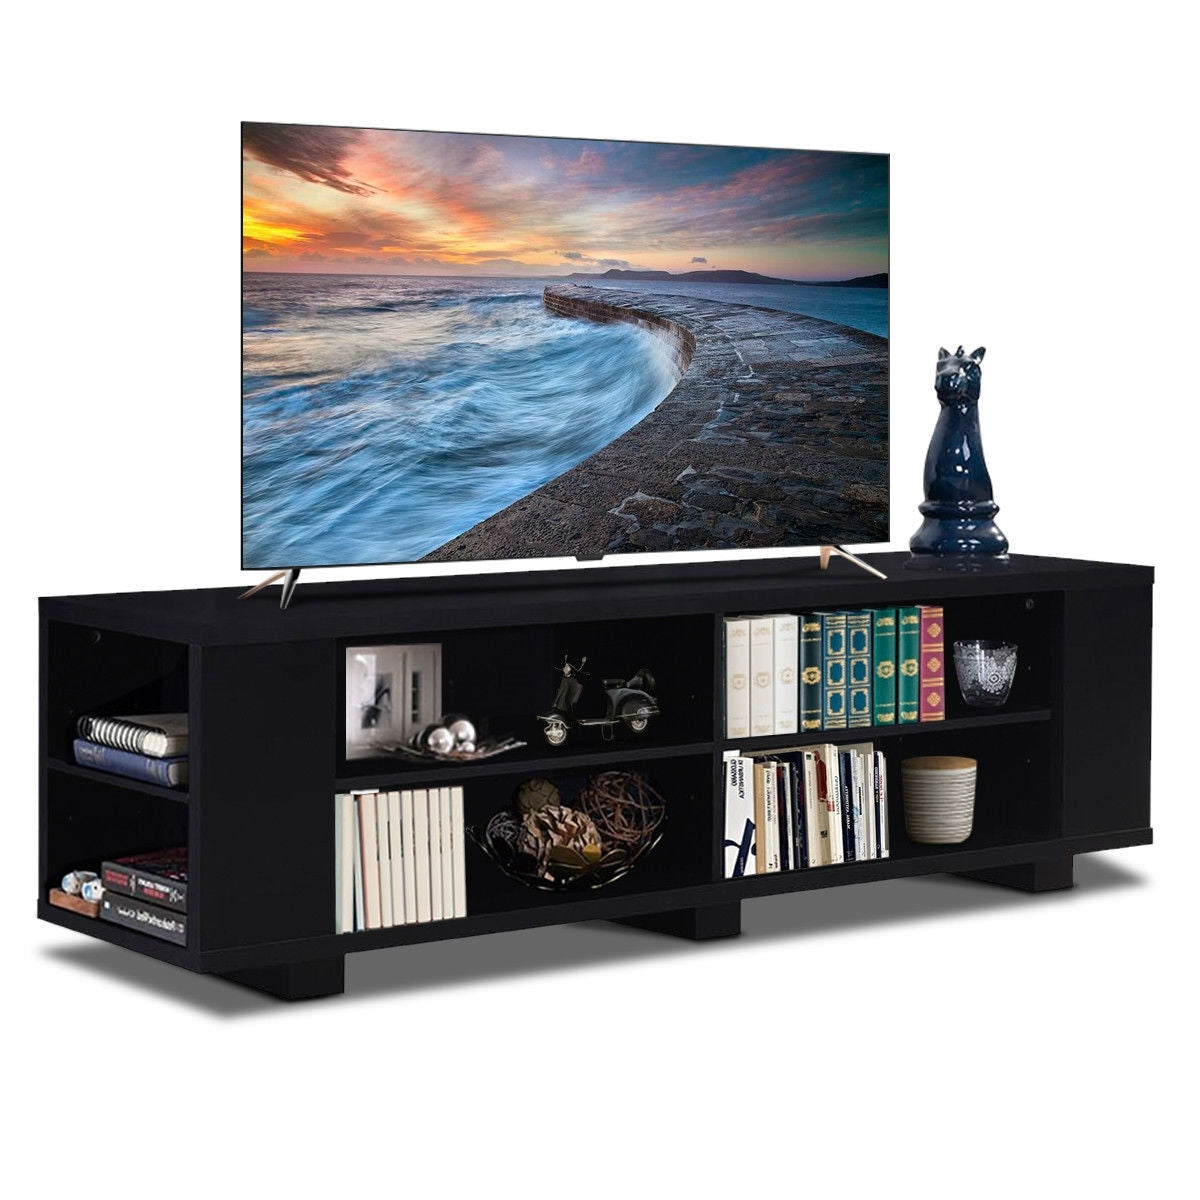 Living Room > TV Stands And Entertainment Centers - Modern Entertainment Center In Black Wood Finish - Holds Up To 60-inch TV